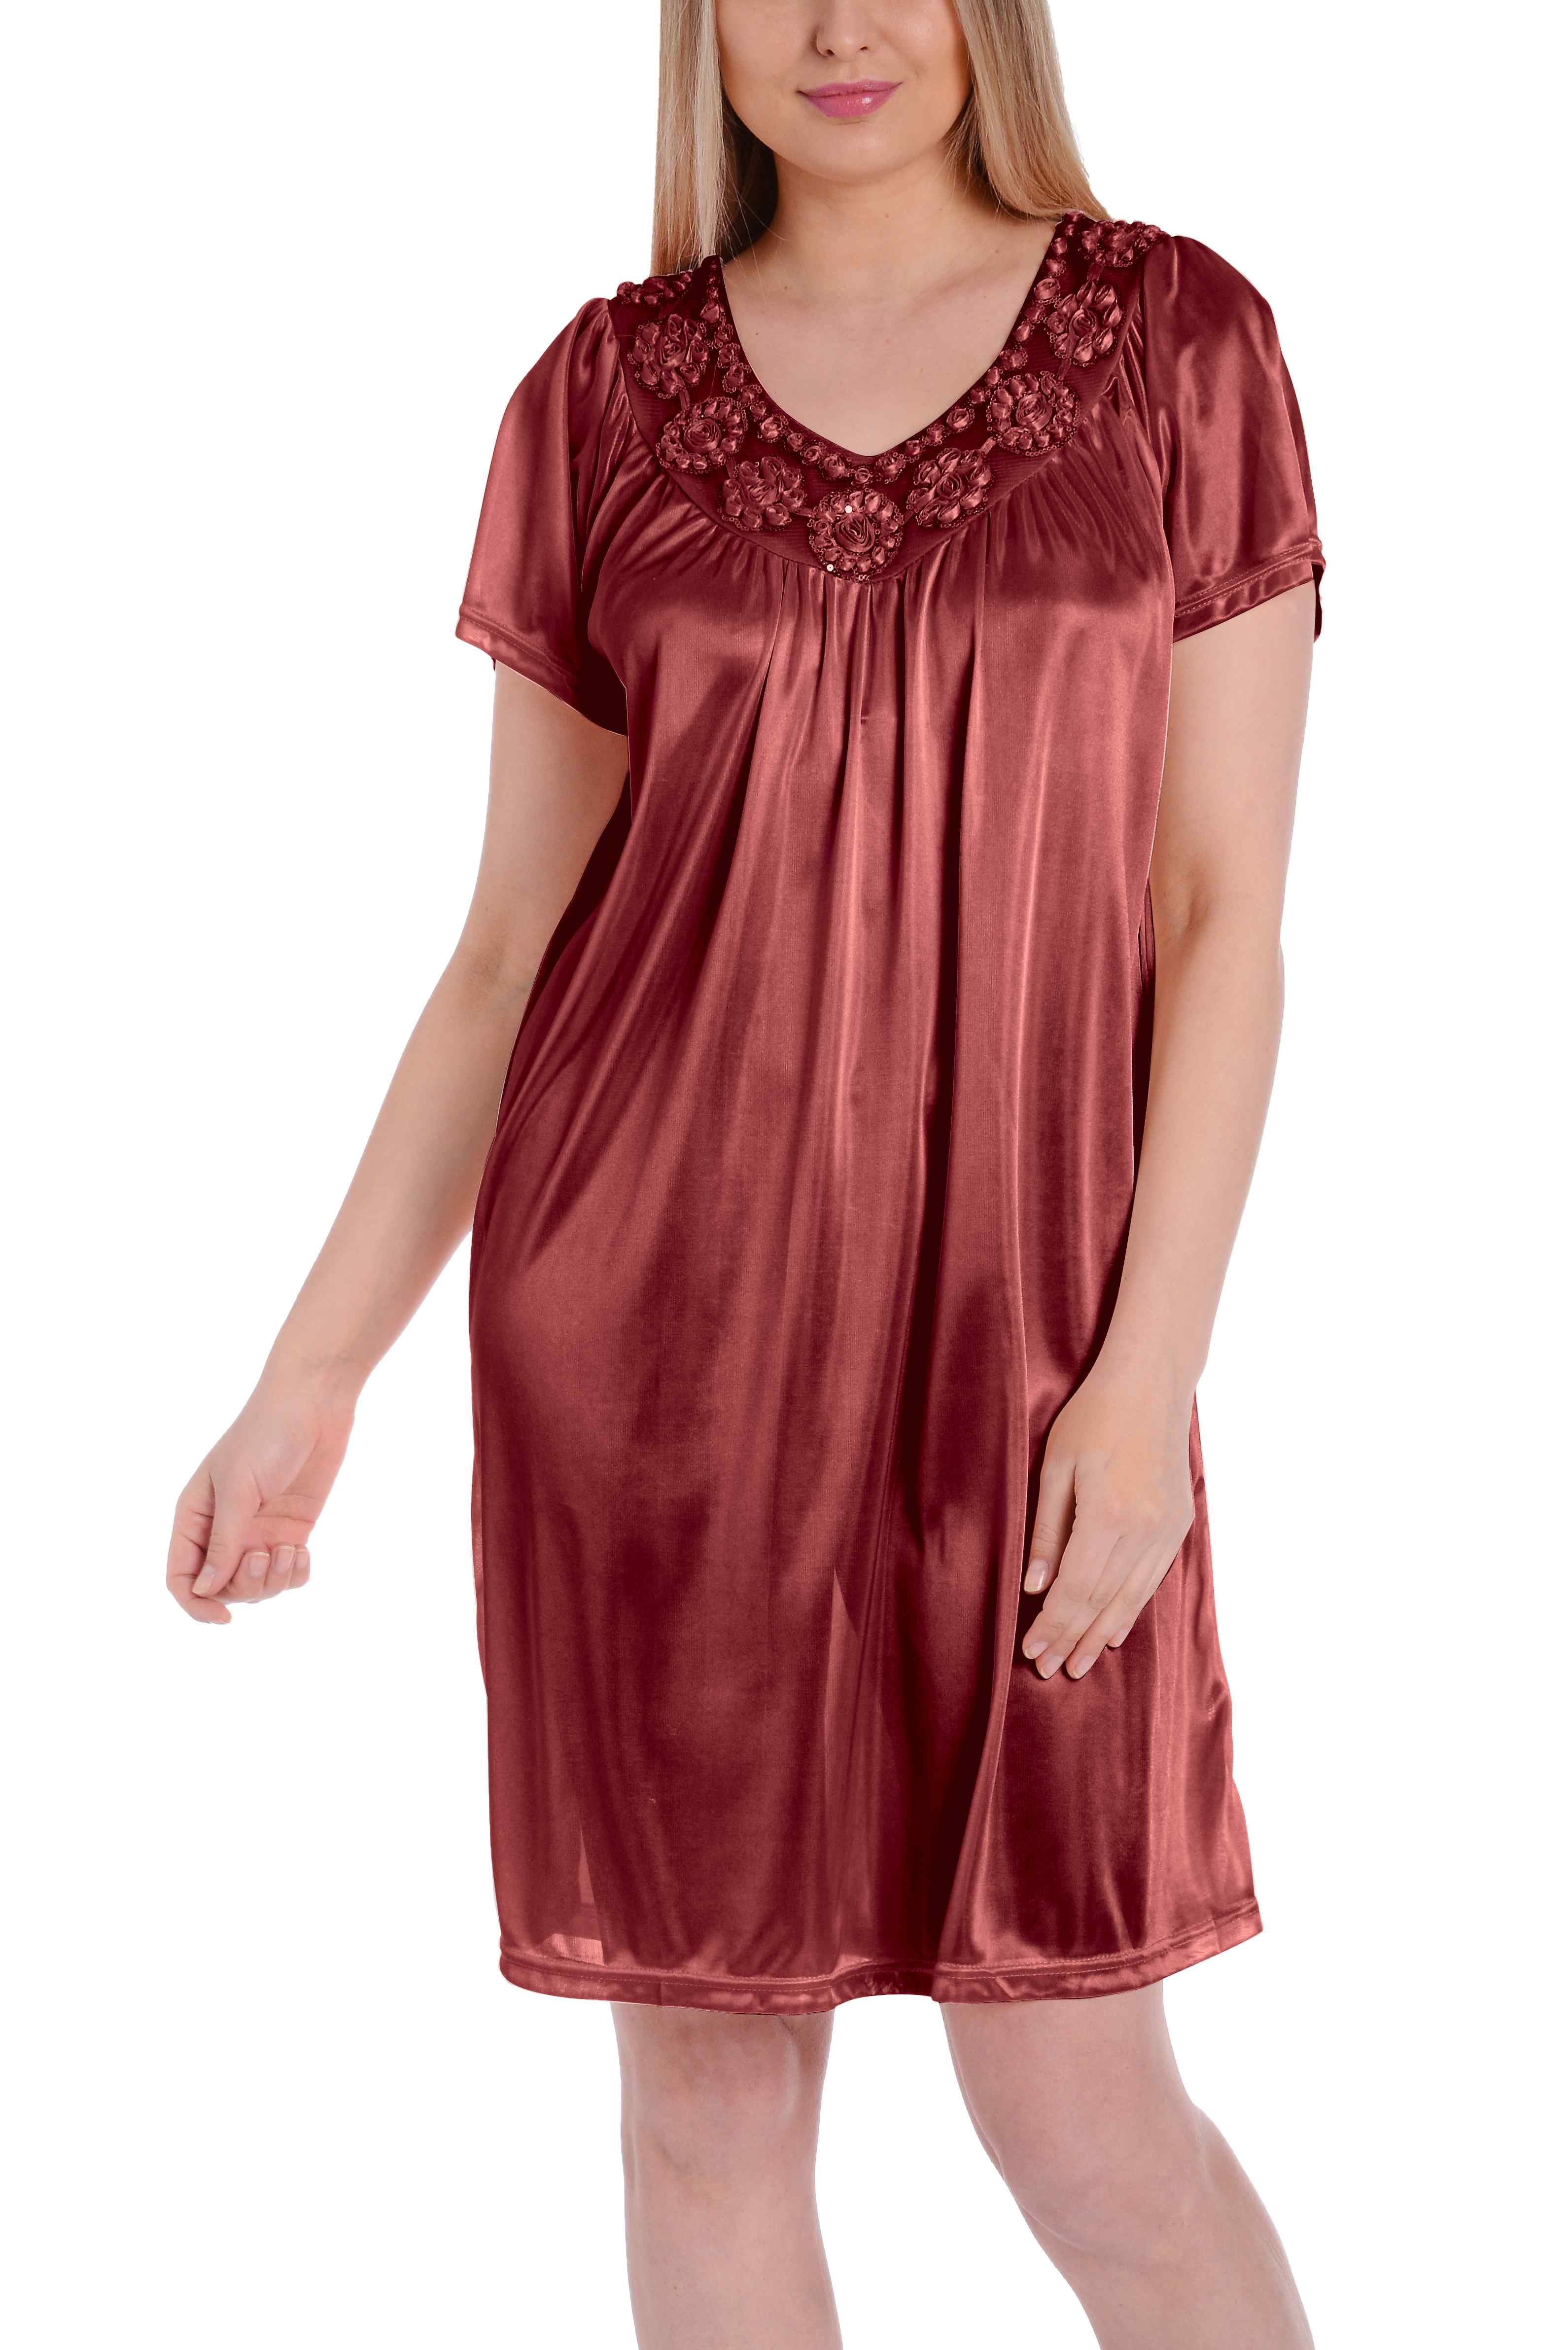 EZI Nightgowns for Women - Soft & Breathable Night Gowns for Adult - Medium to Plus Size Womens Sleep Shirts - Knee-Length - Walmart.com